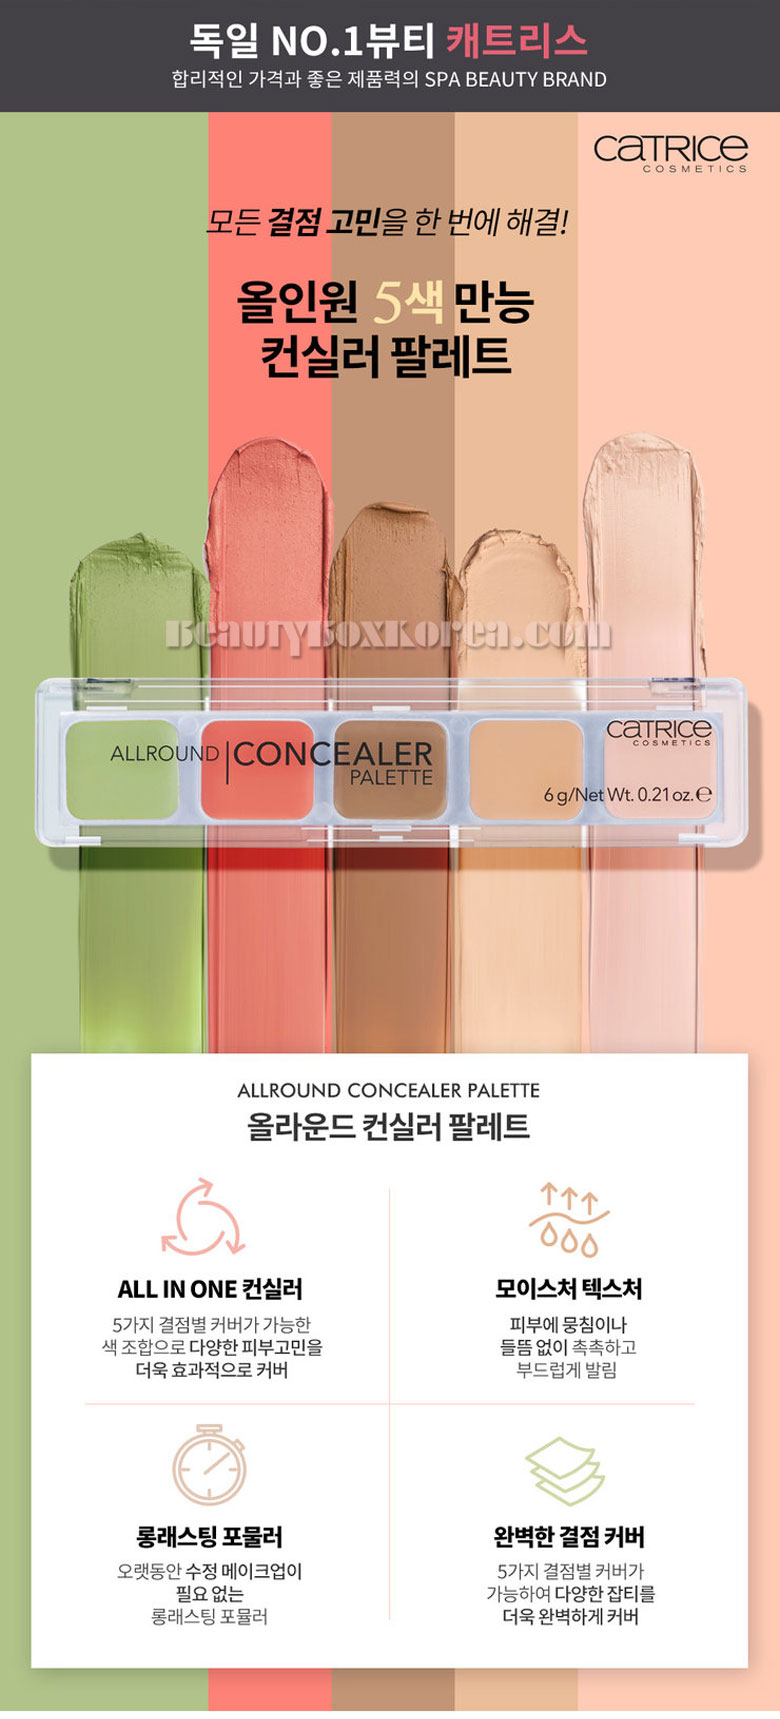 CATRICE Allround Concealer Palette 6g | Best Price and Fast Shipping from  Beauty Box Korea